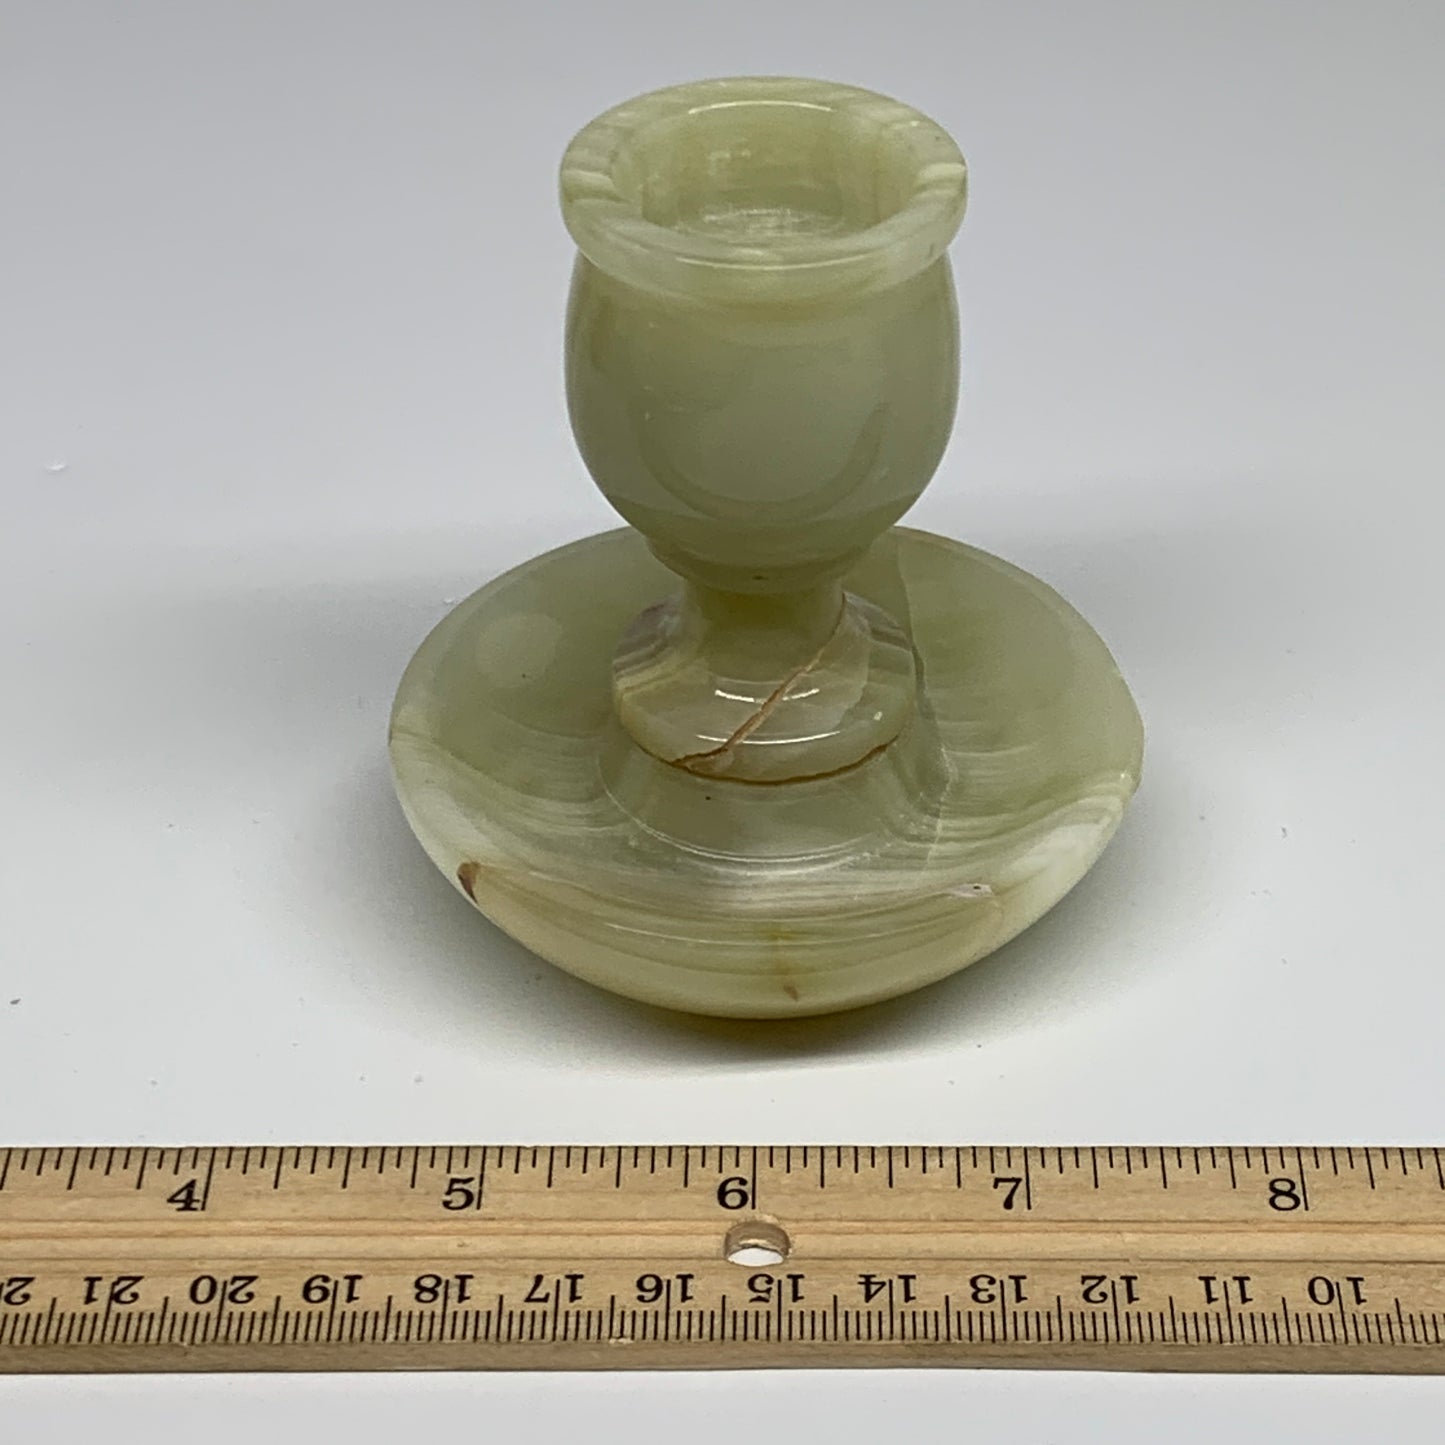 270g, 3.2"x1.5"x3", Natural Green Onyx Candle Holder Gemstone Hand Carved, B3220